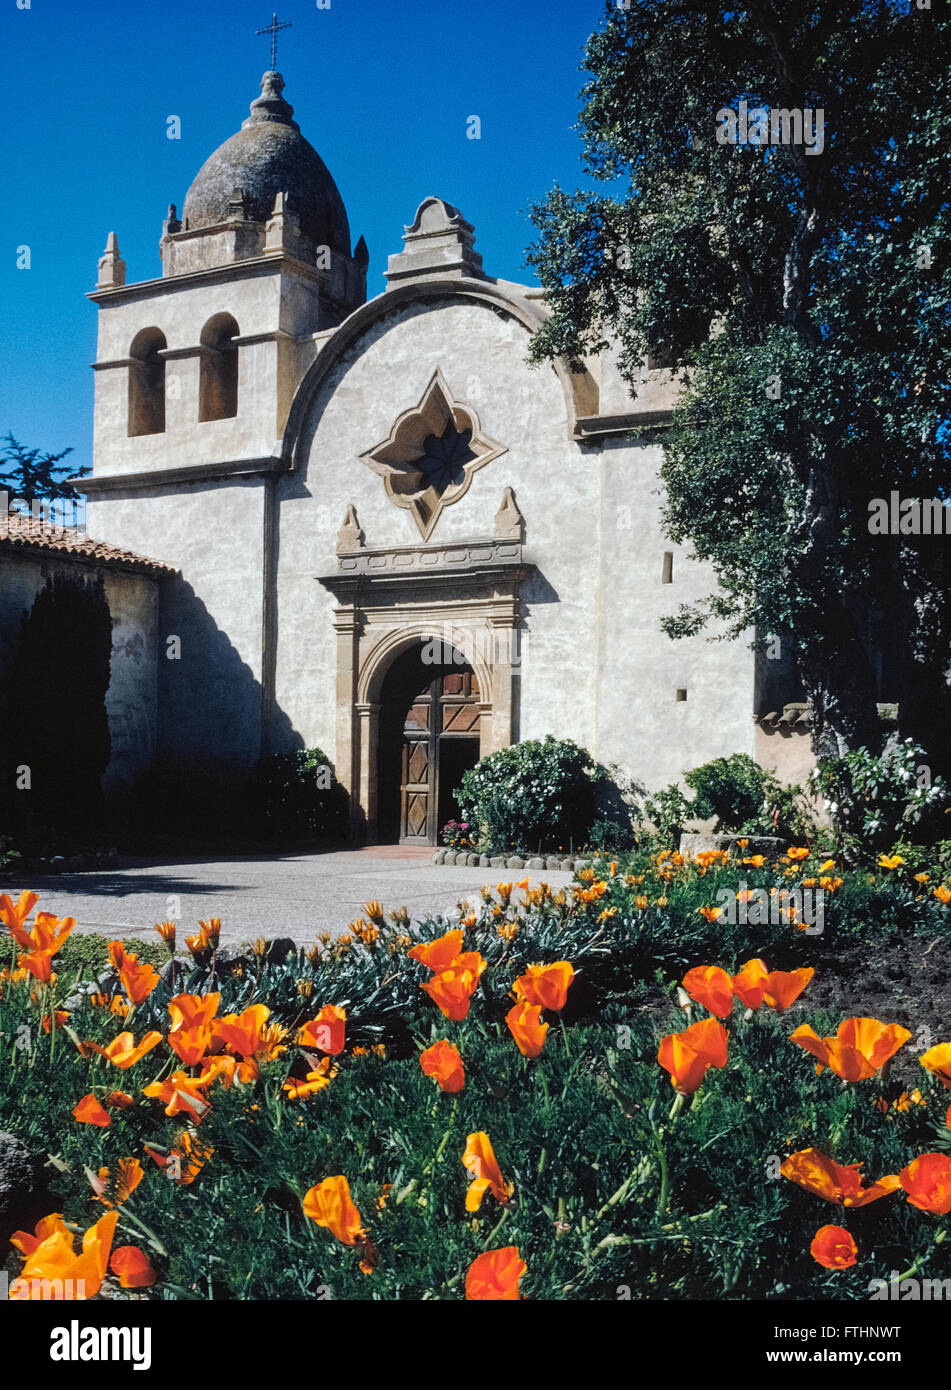 The Basilica Church of Mission San Carlos Borromeo de Carmelo was founded in 1771 by Father Junipero Serra in what is now Carmel, California, USA. The fabled Spanish priest who was a Franciscan friar became a Catholic saint when canonized by Pope Francis in September, 2015. The Carmel mission was the second of 21 California missions established up and down the state; it was one of nine founded by Saint Serra. He died there in1784 at the age of 70 and is buried under the sanctuary floor. Stock Photo